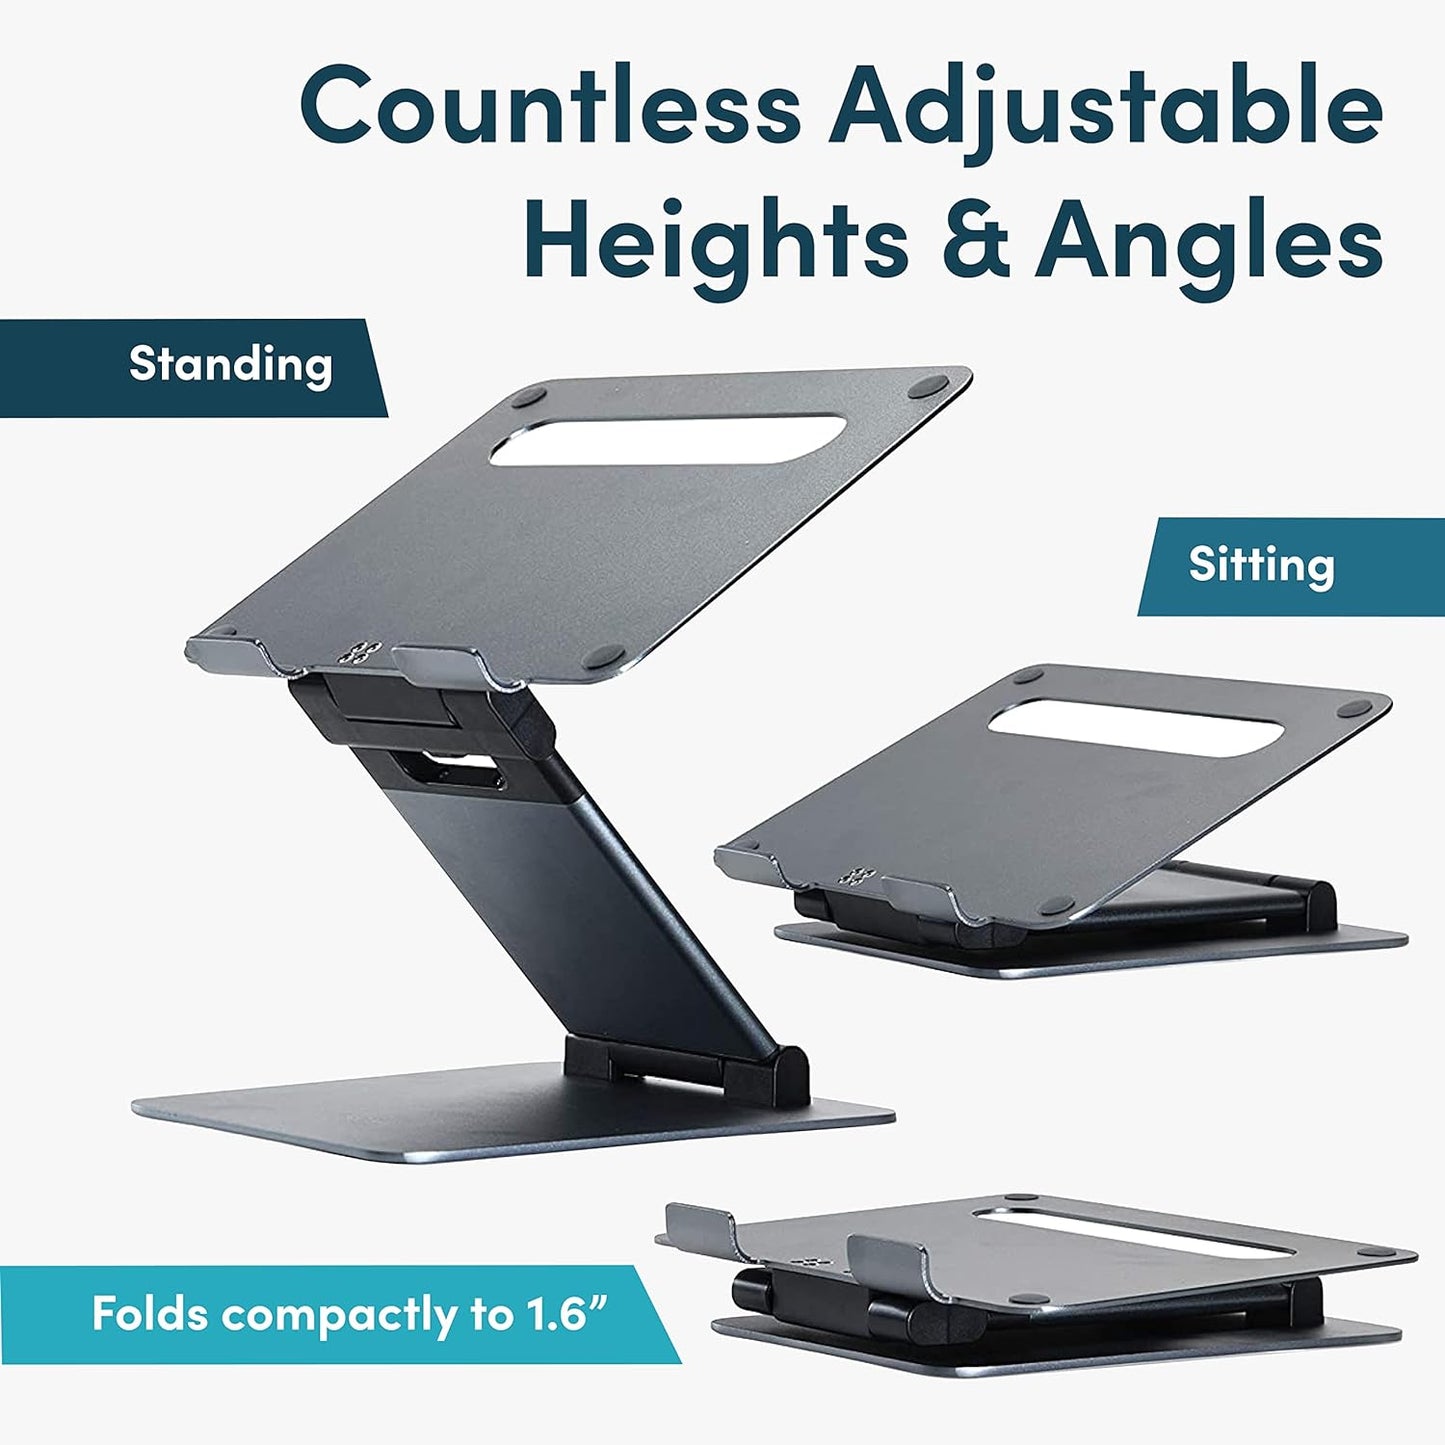 Lifelong Ergonomic Laptop Stand For Desk, Adjustable Height Up To 20"